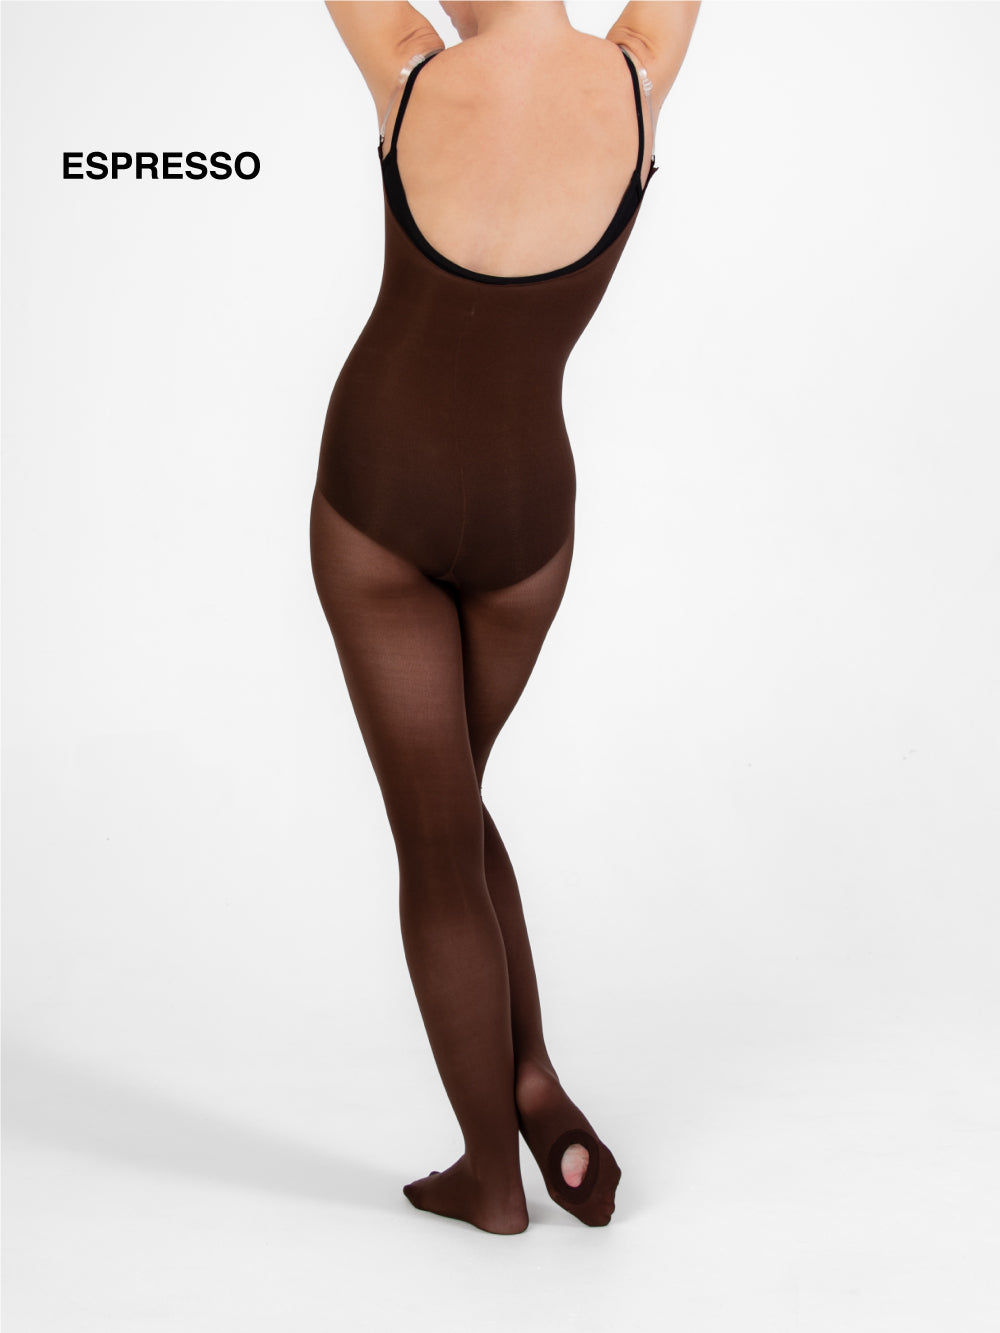 Body Wrappers Camisole Convertible Body Tight - Baum's Dancewear